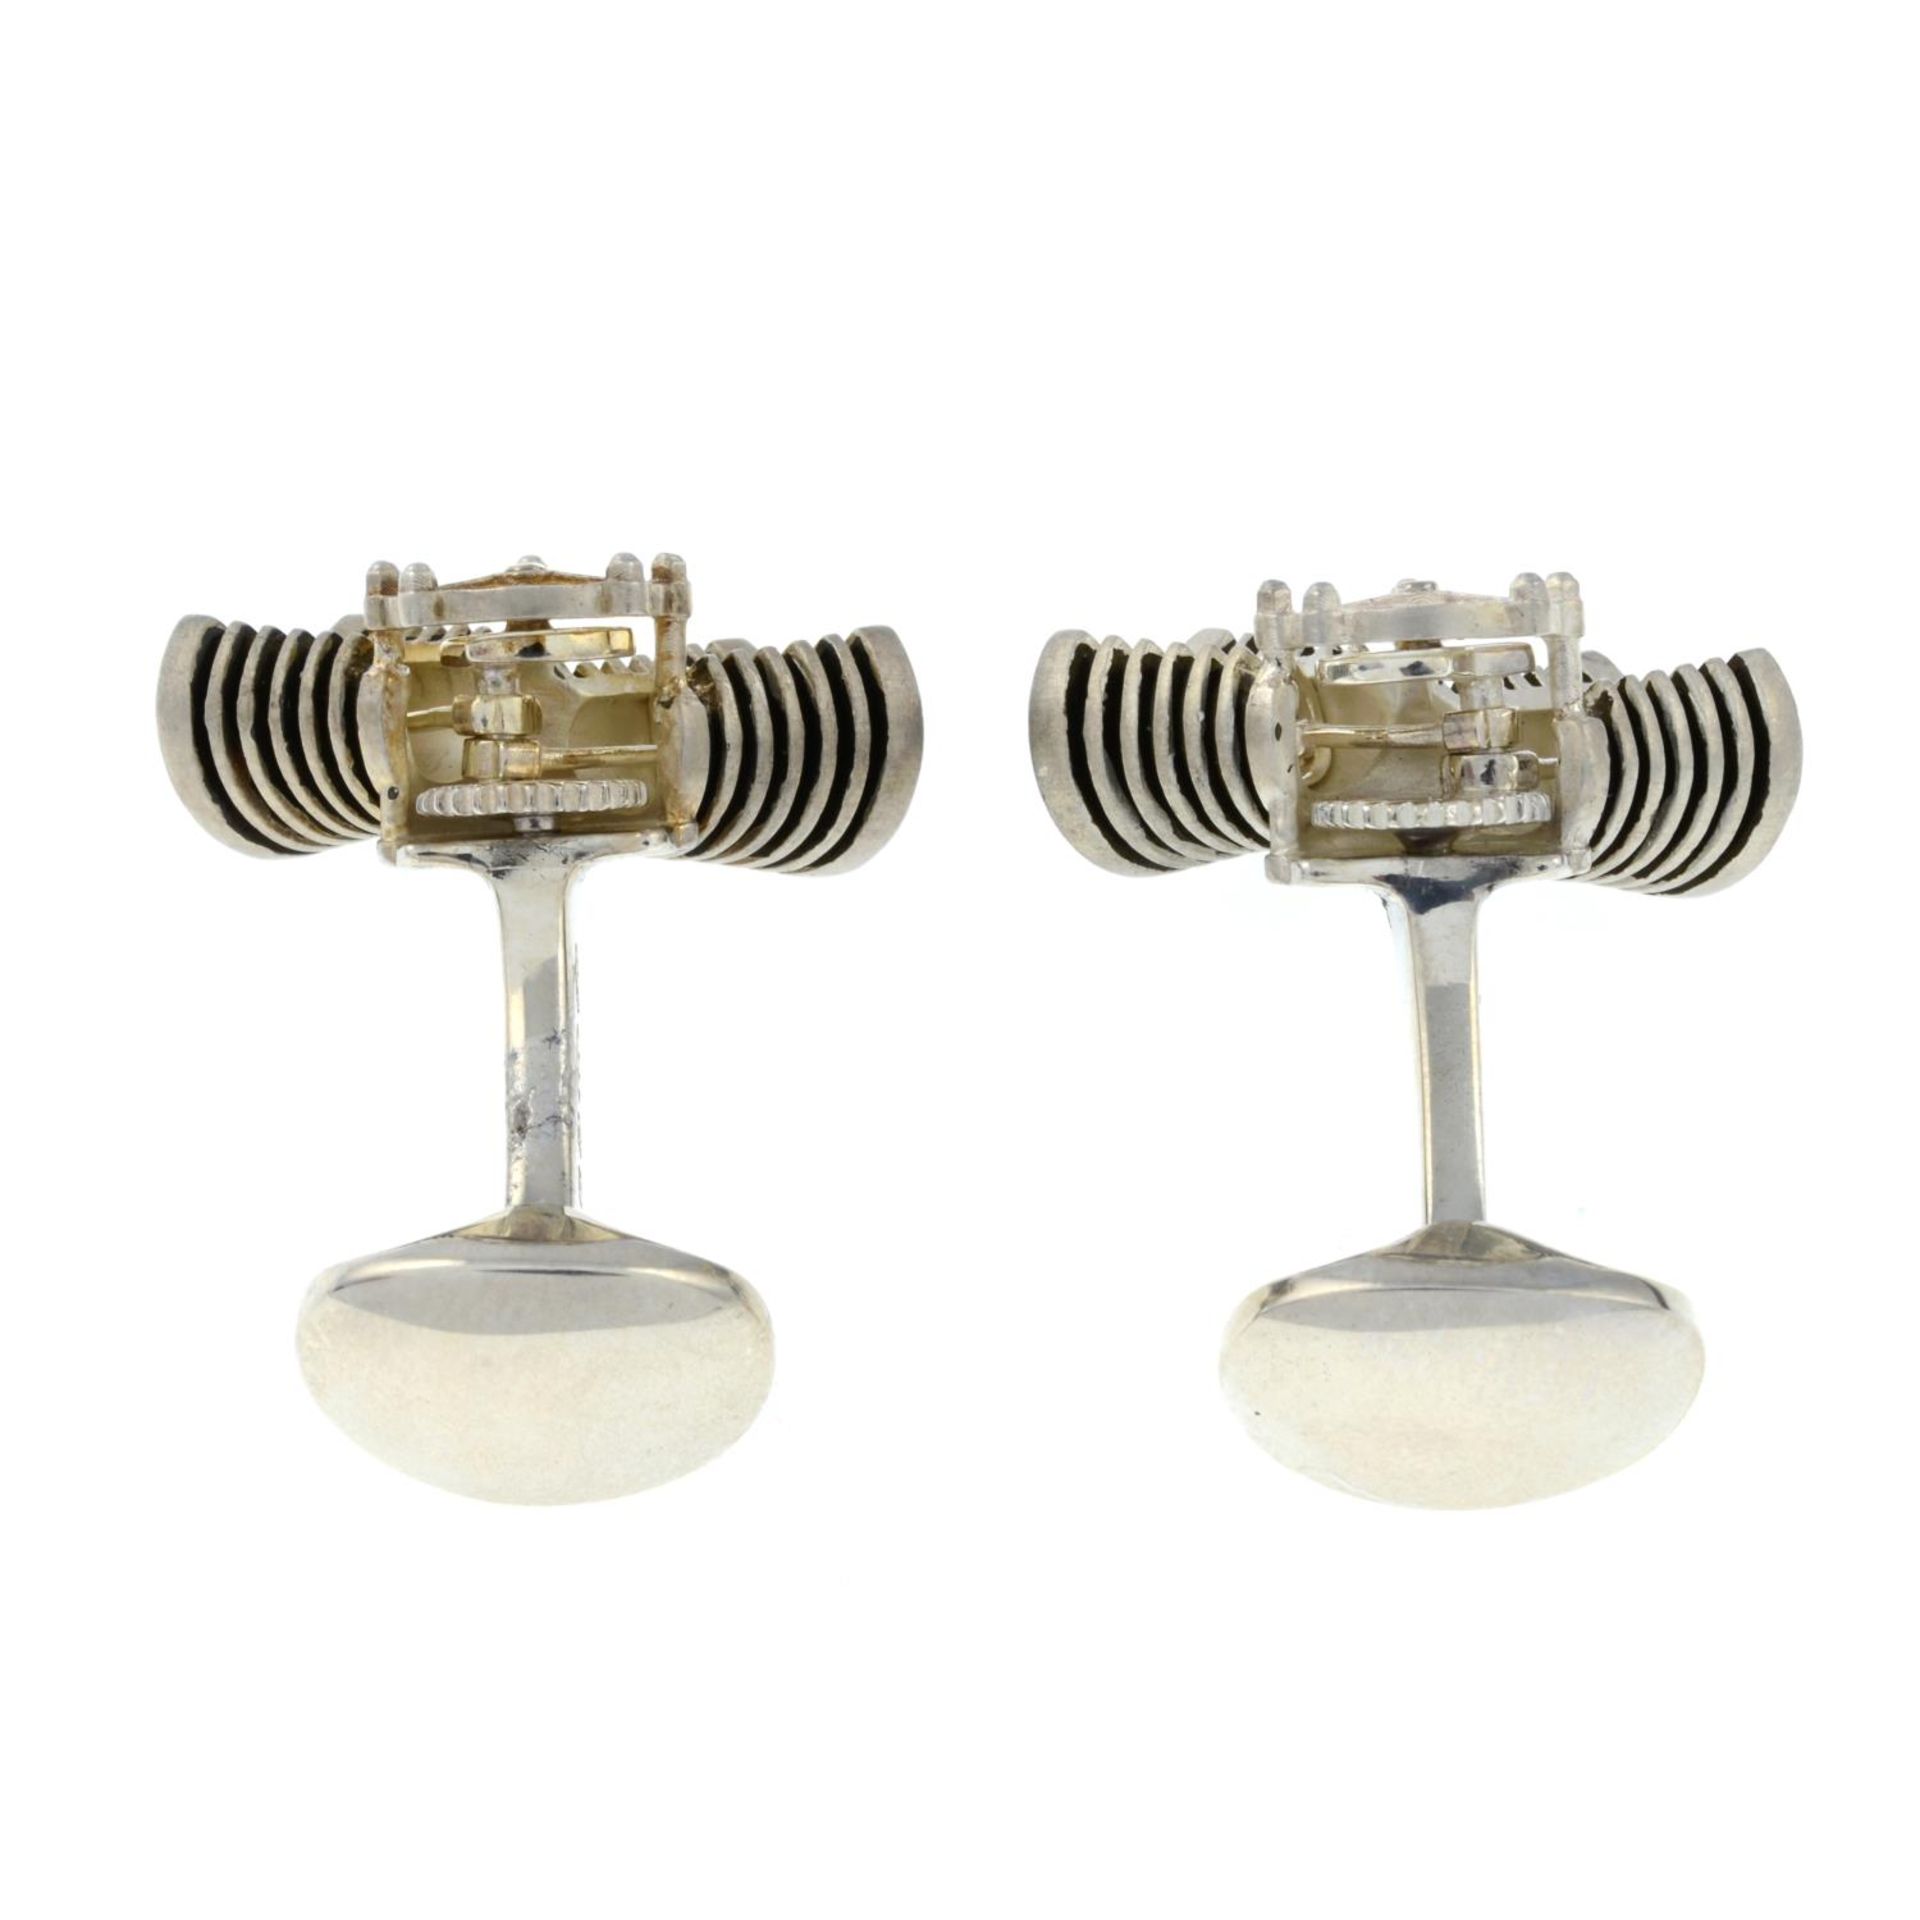 A pair of silver piston cufflinks, by Deakin and Francis.Signed D&F. - Image 3 of 3